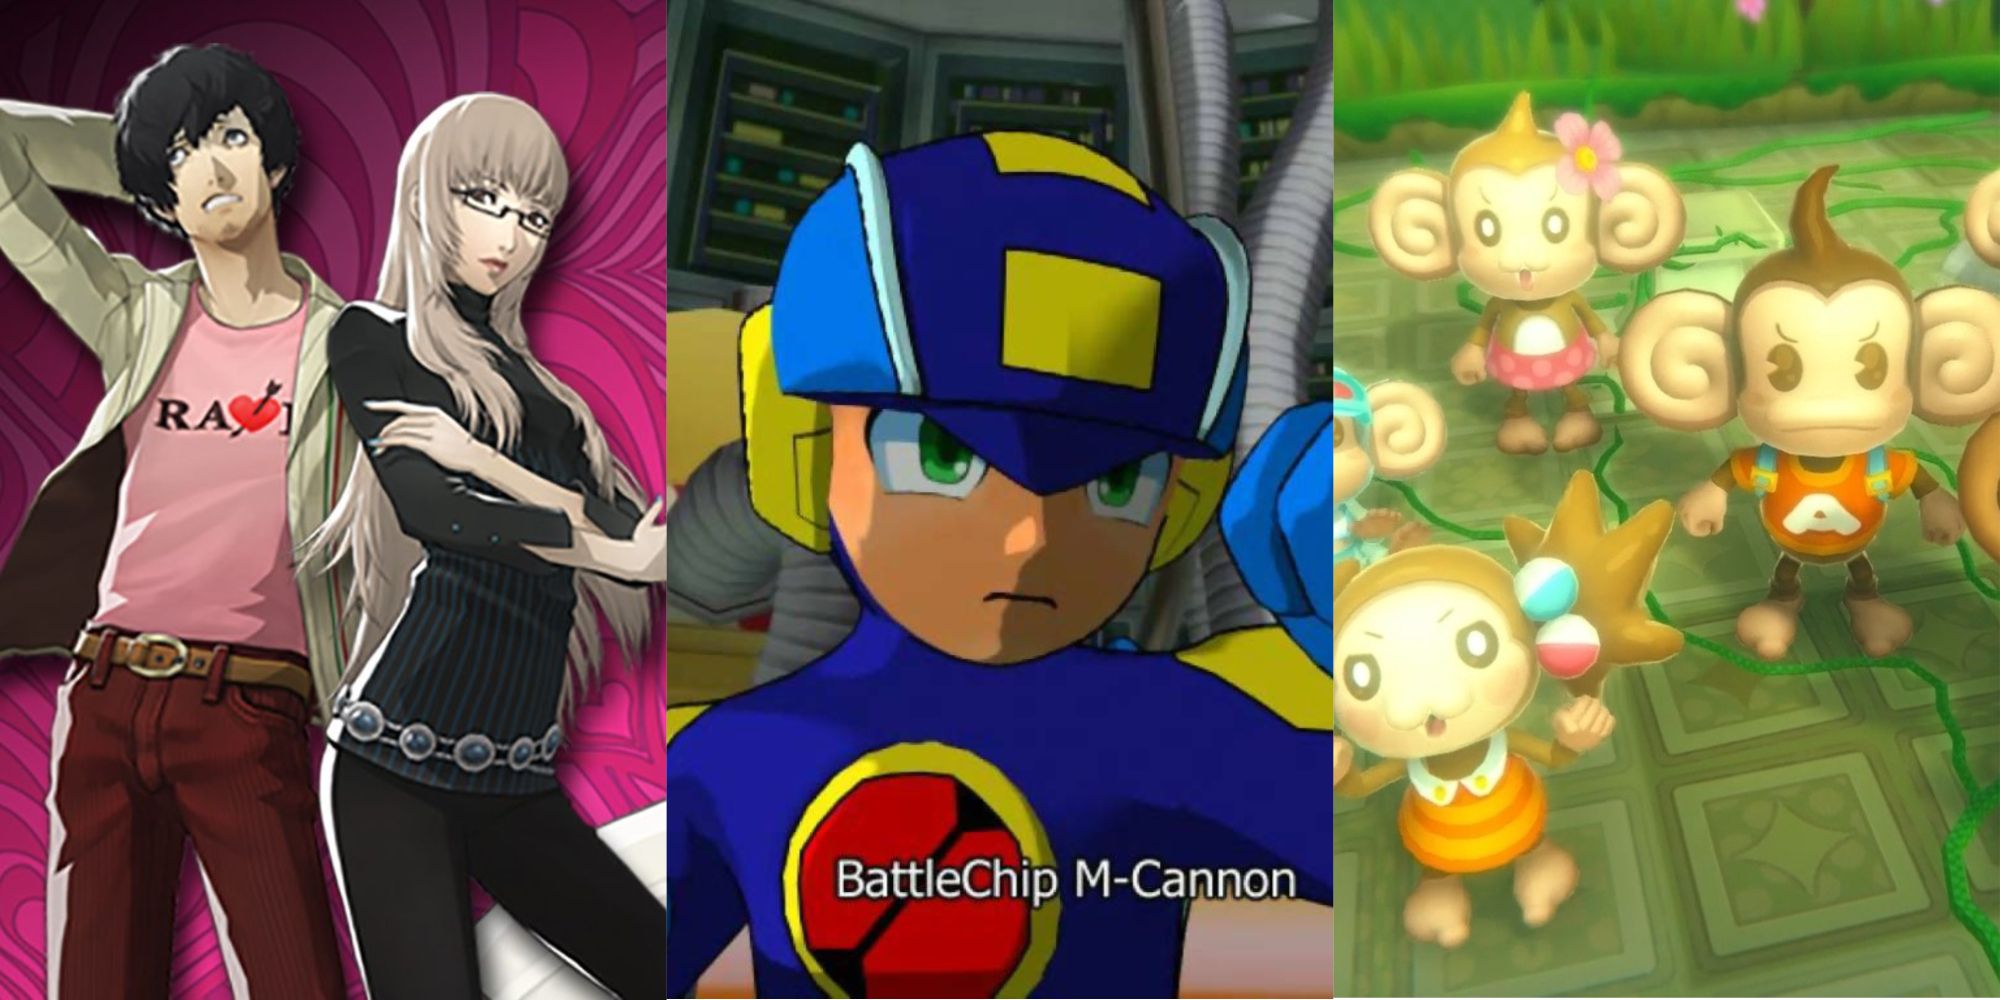 Games That Are Harder Than They Look Featured - Catherine, Mega Man, Super Monkey Ball